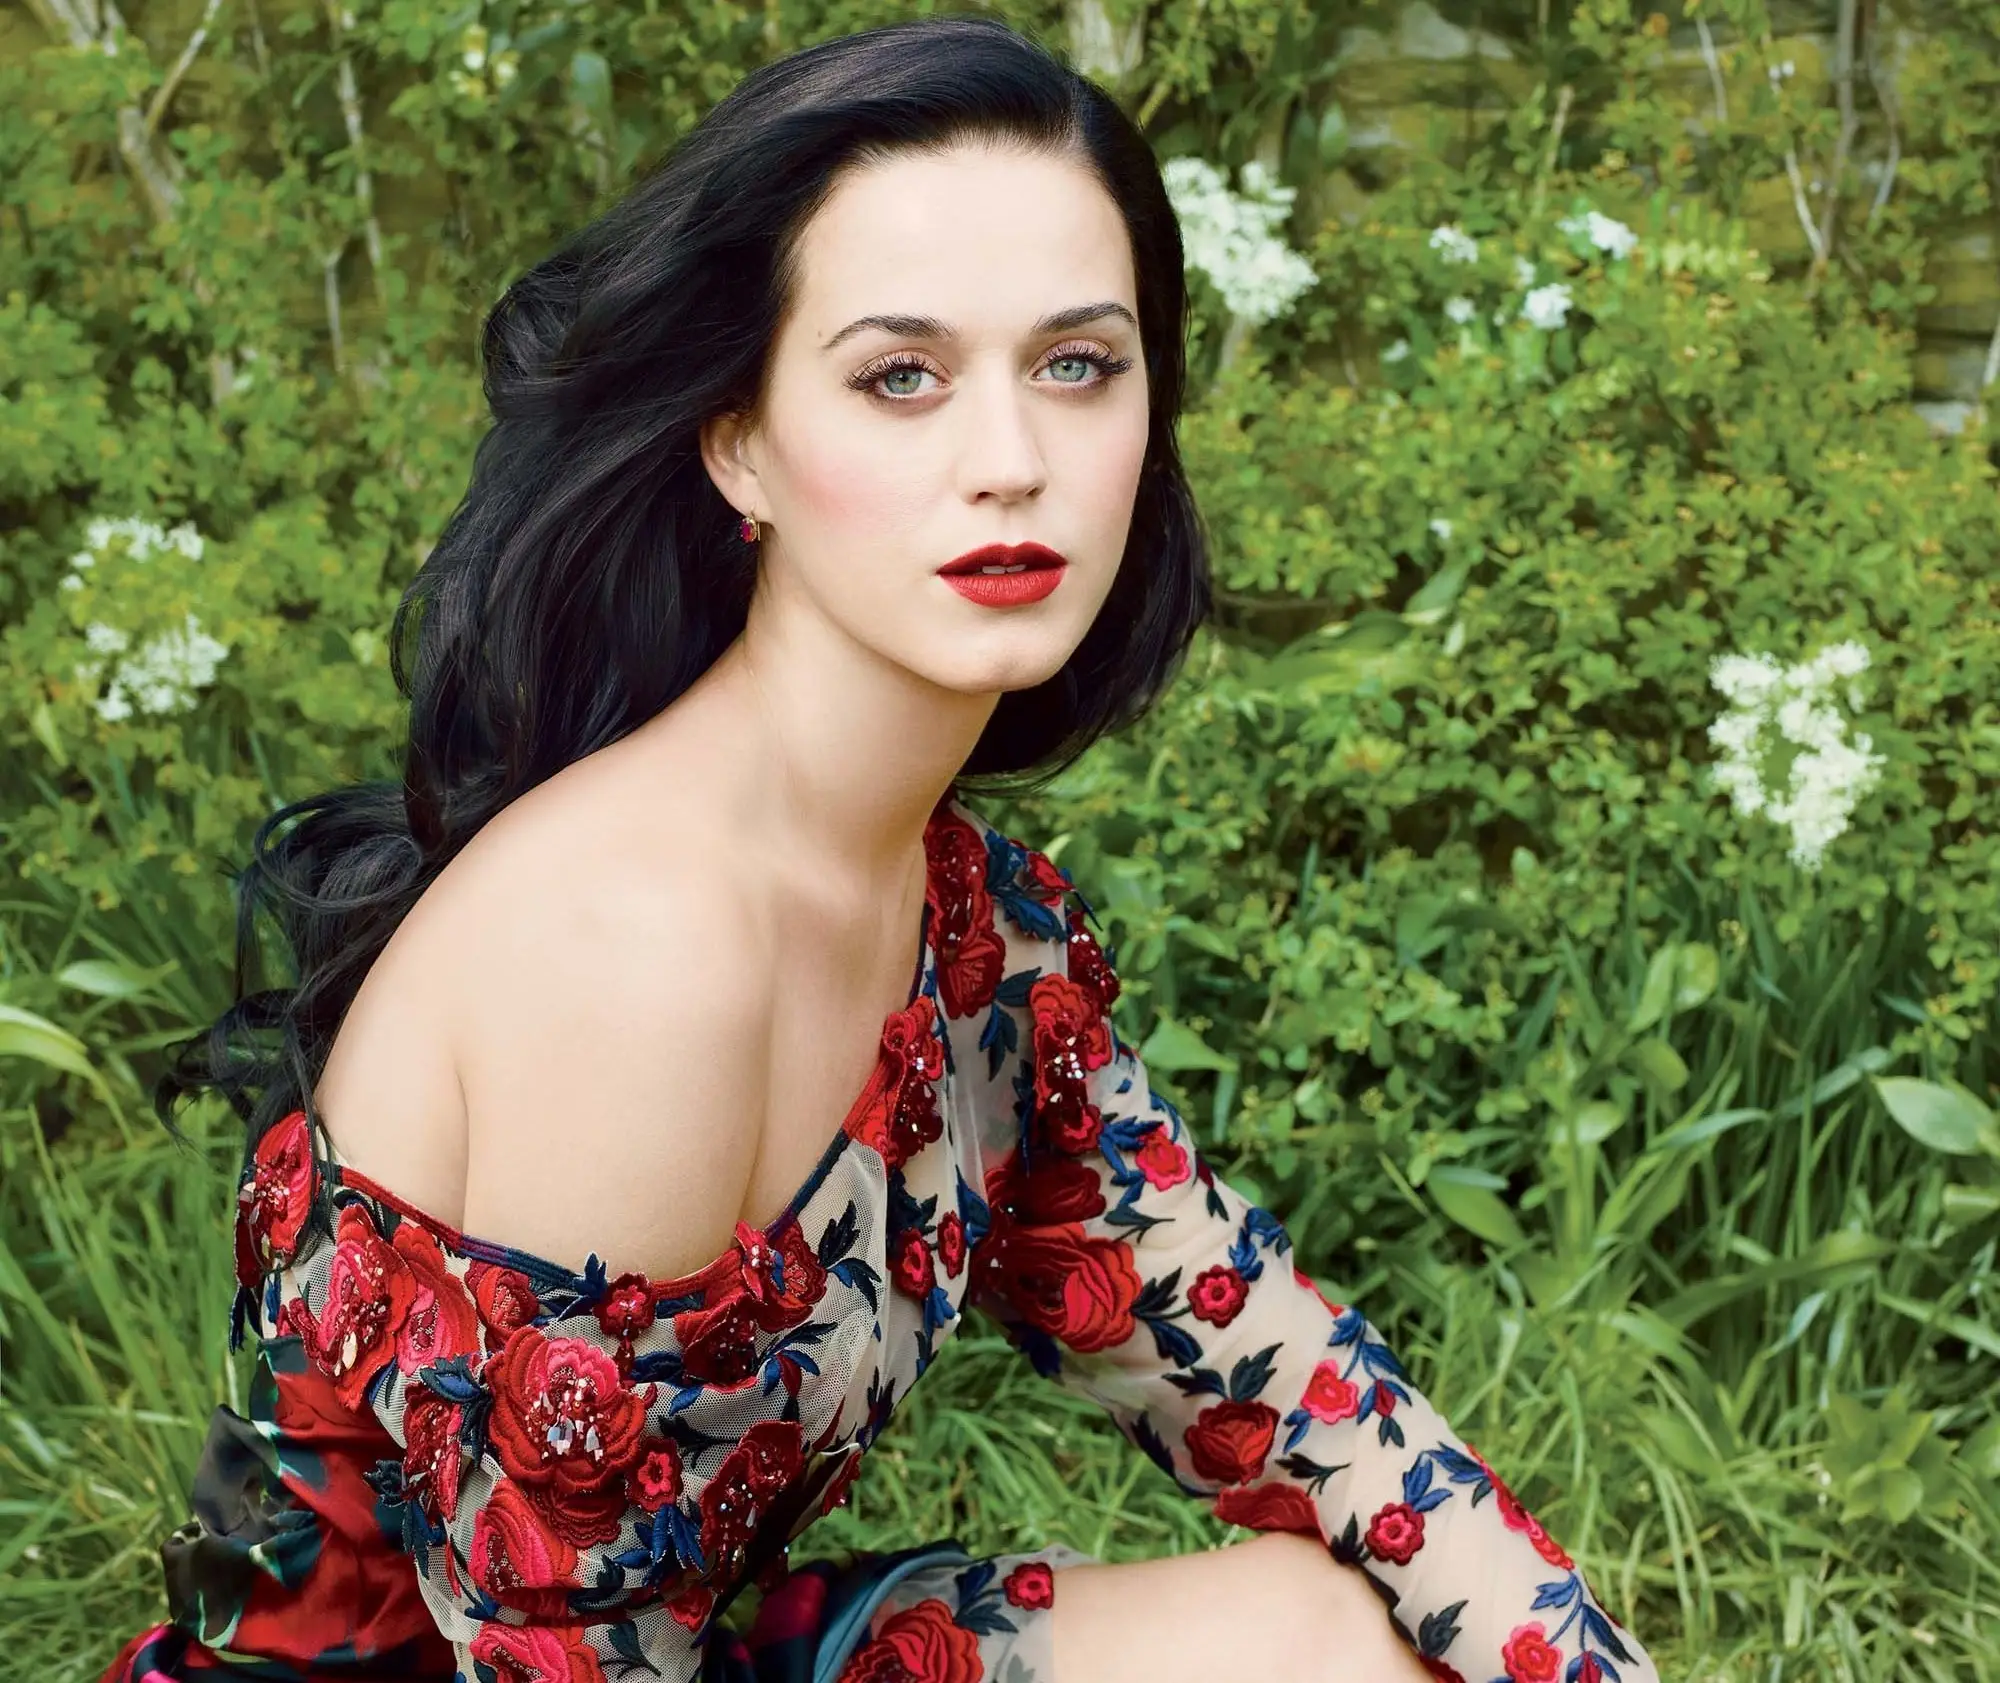 Katy Perry by Annie Leibovitz for Vogue July 2013 / AvaxHome